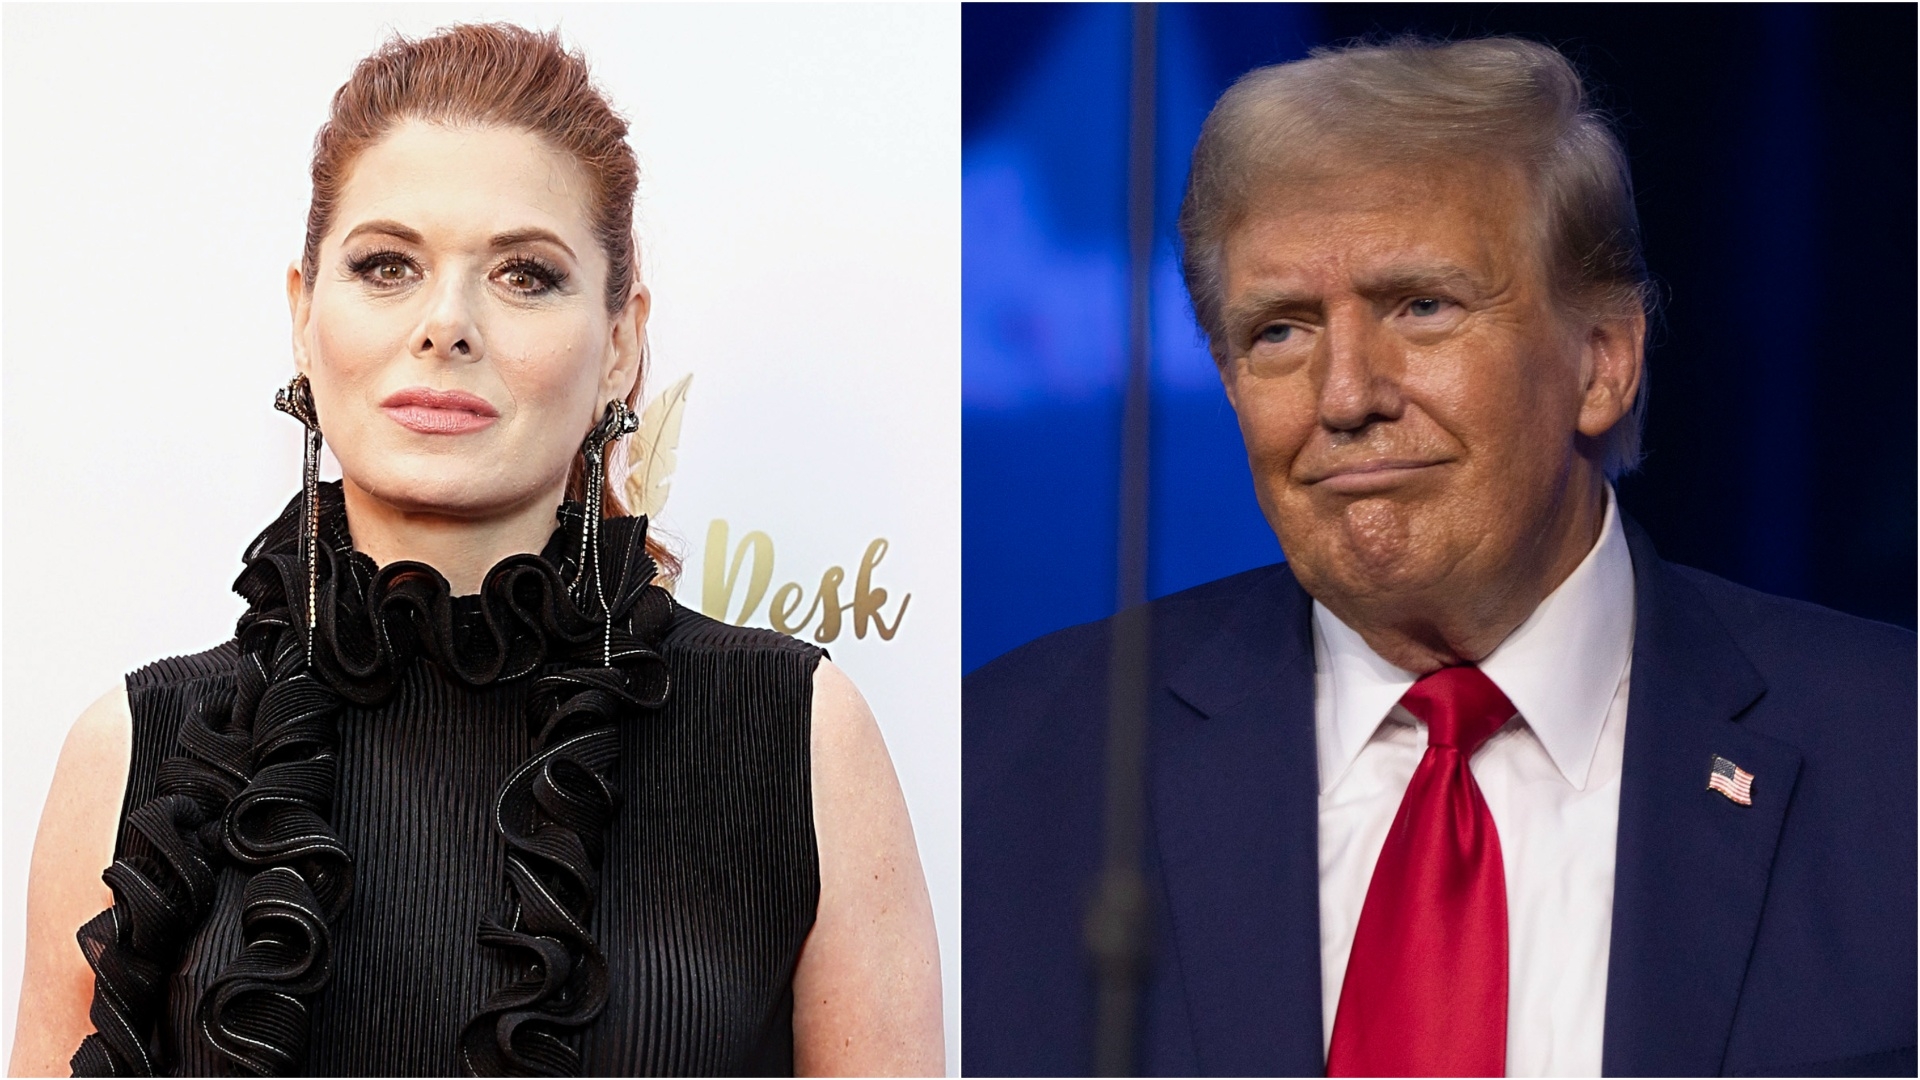 The Donald Trump-Debra Messing feud is maybe, partially, about an unrequited crush